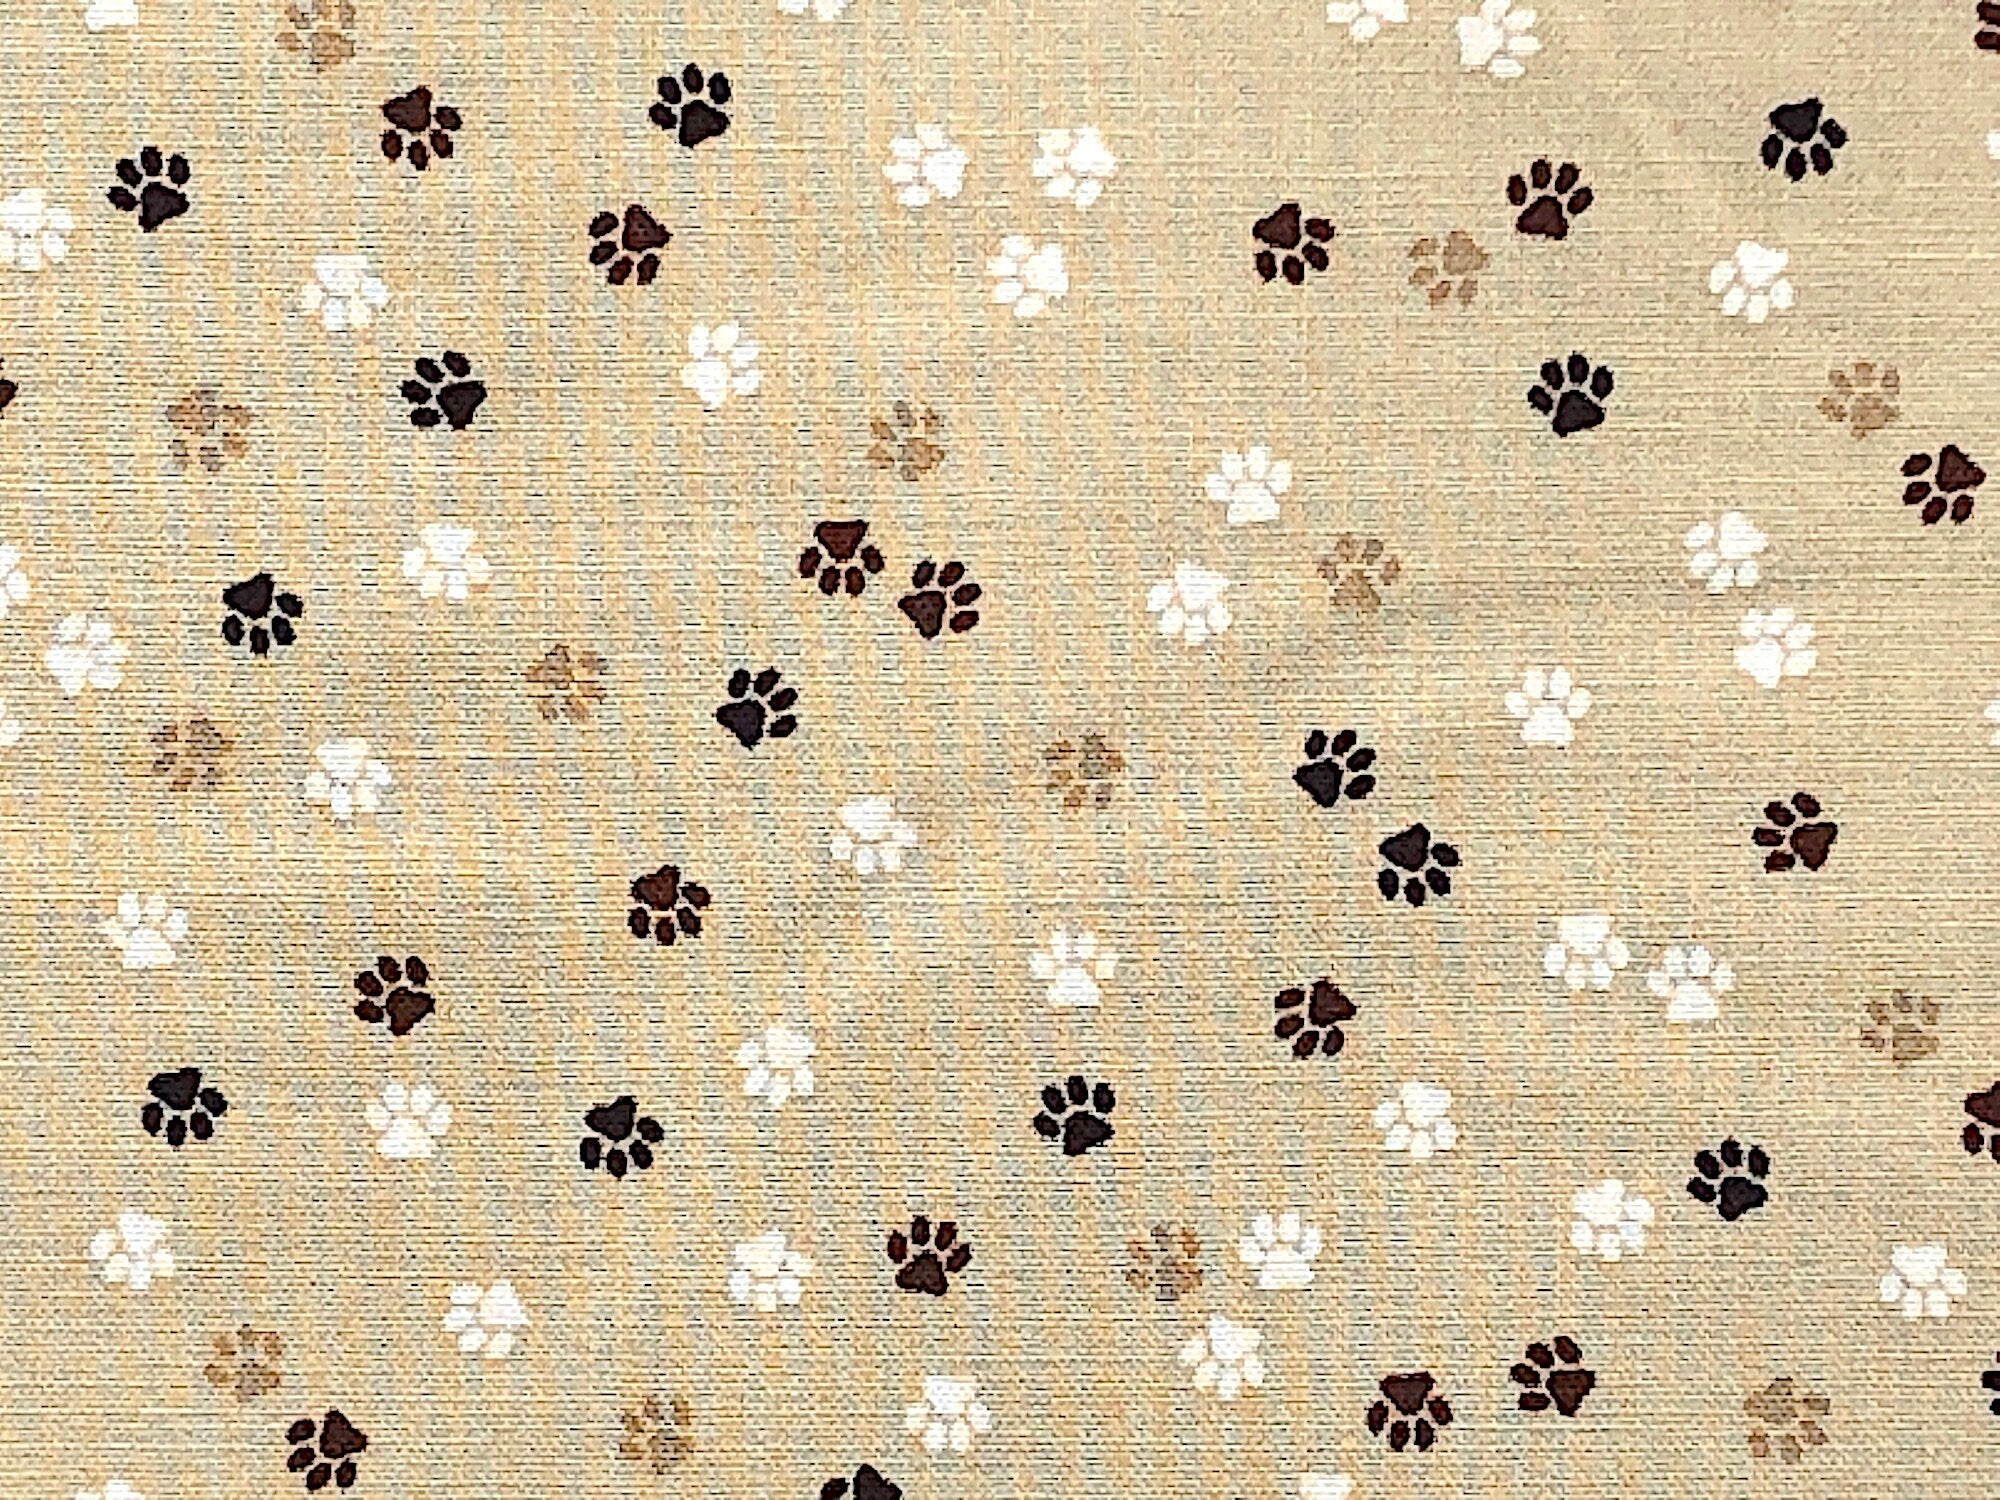 Brown and Cream colored Paw Prints cover this beige fabric